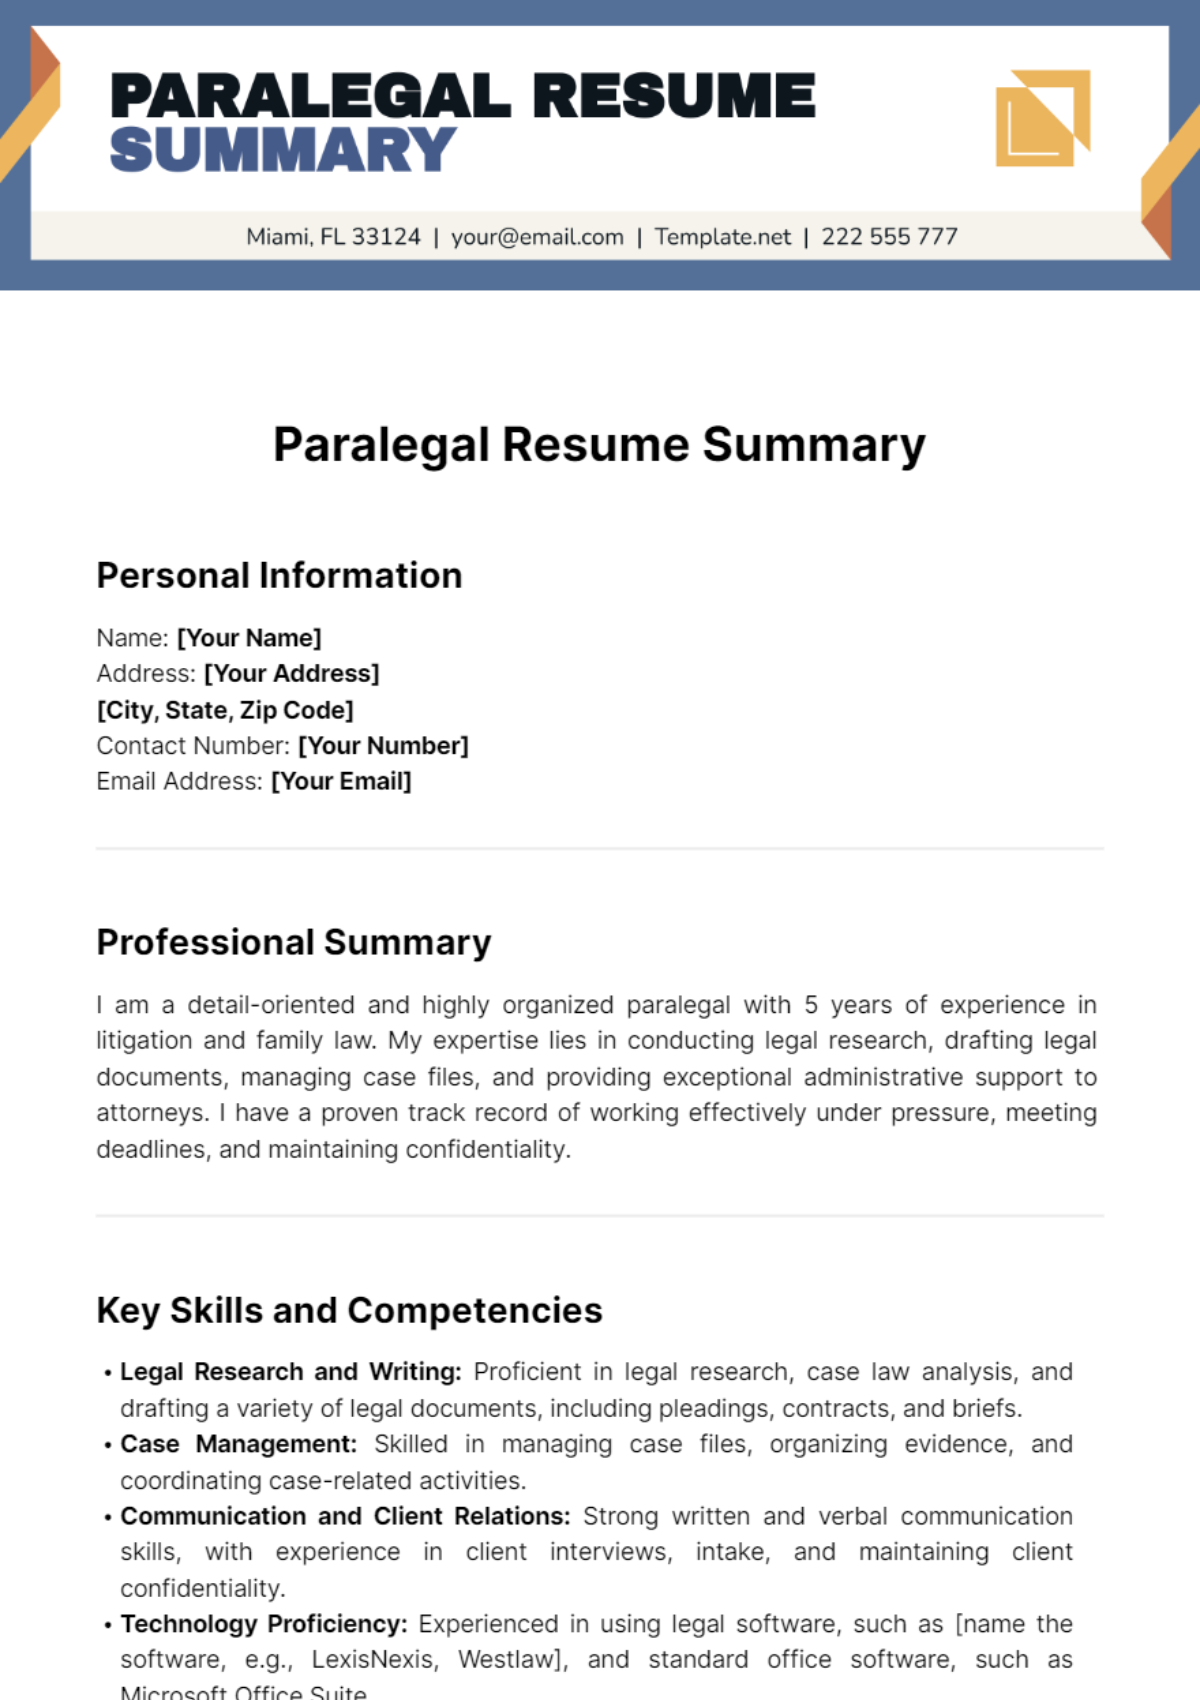 Free Paralegal Resume Summary Template